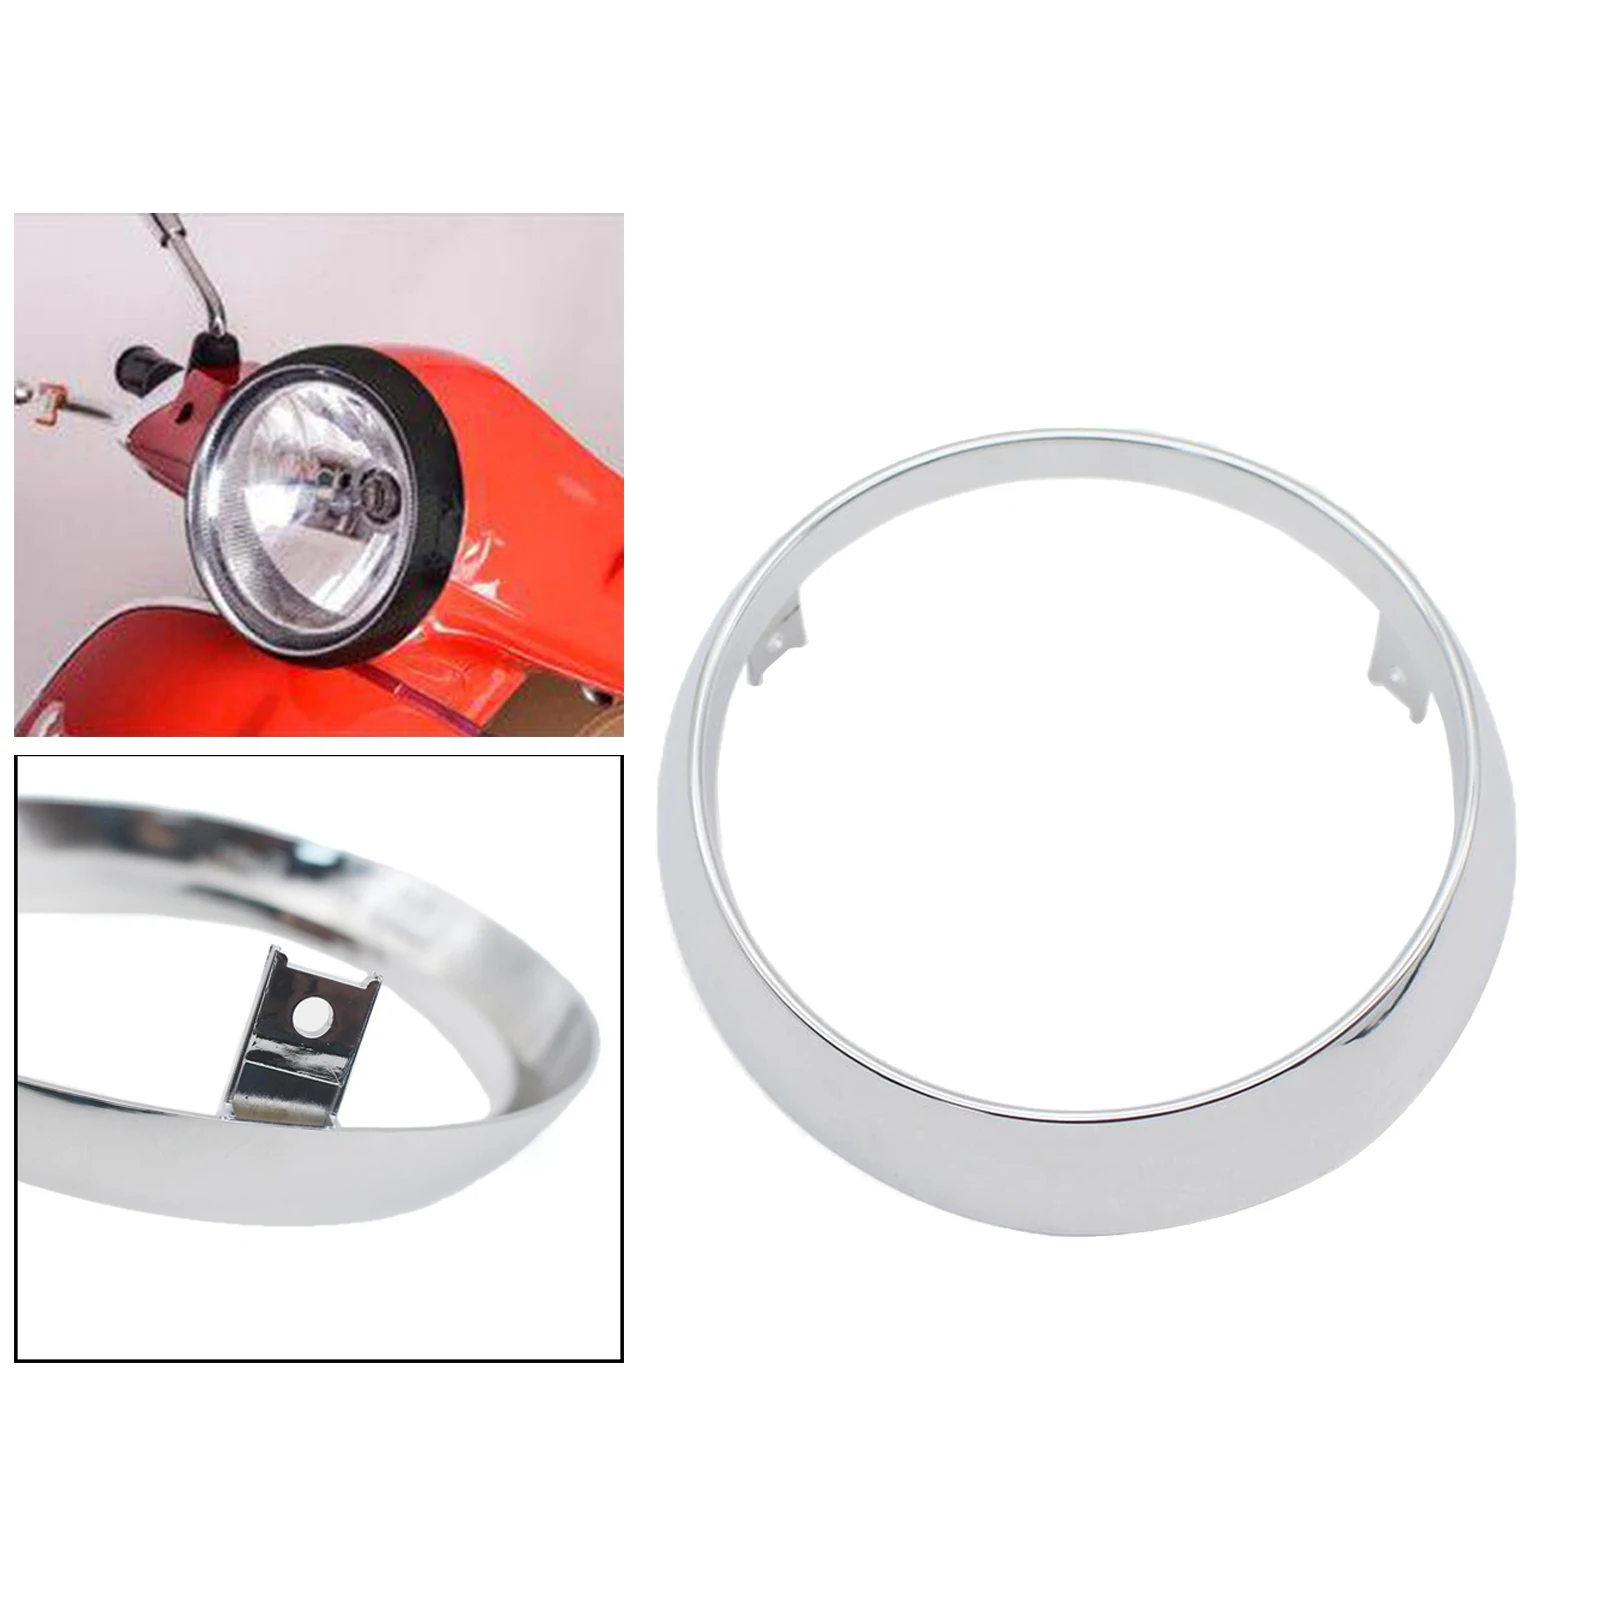 ABS Plastic Motorbike Headlight Trim Ring for Vespa Primavera 125 250 300 Easy to Use and Operate